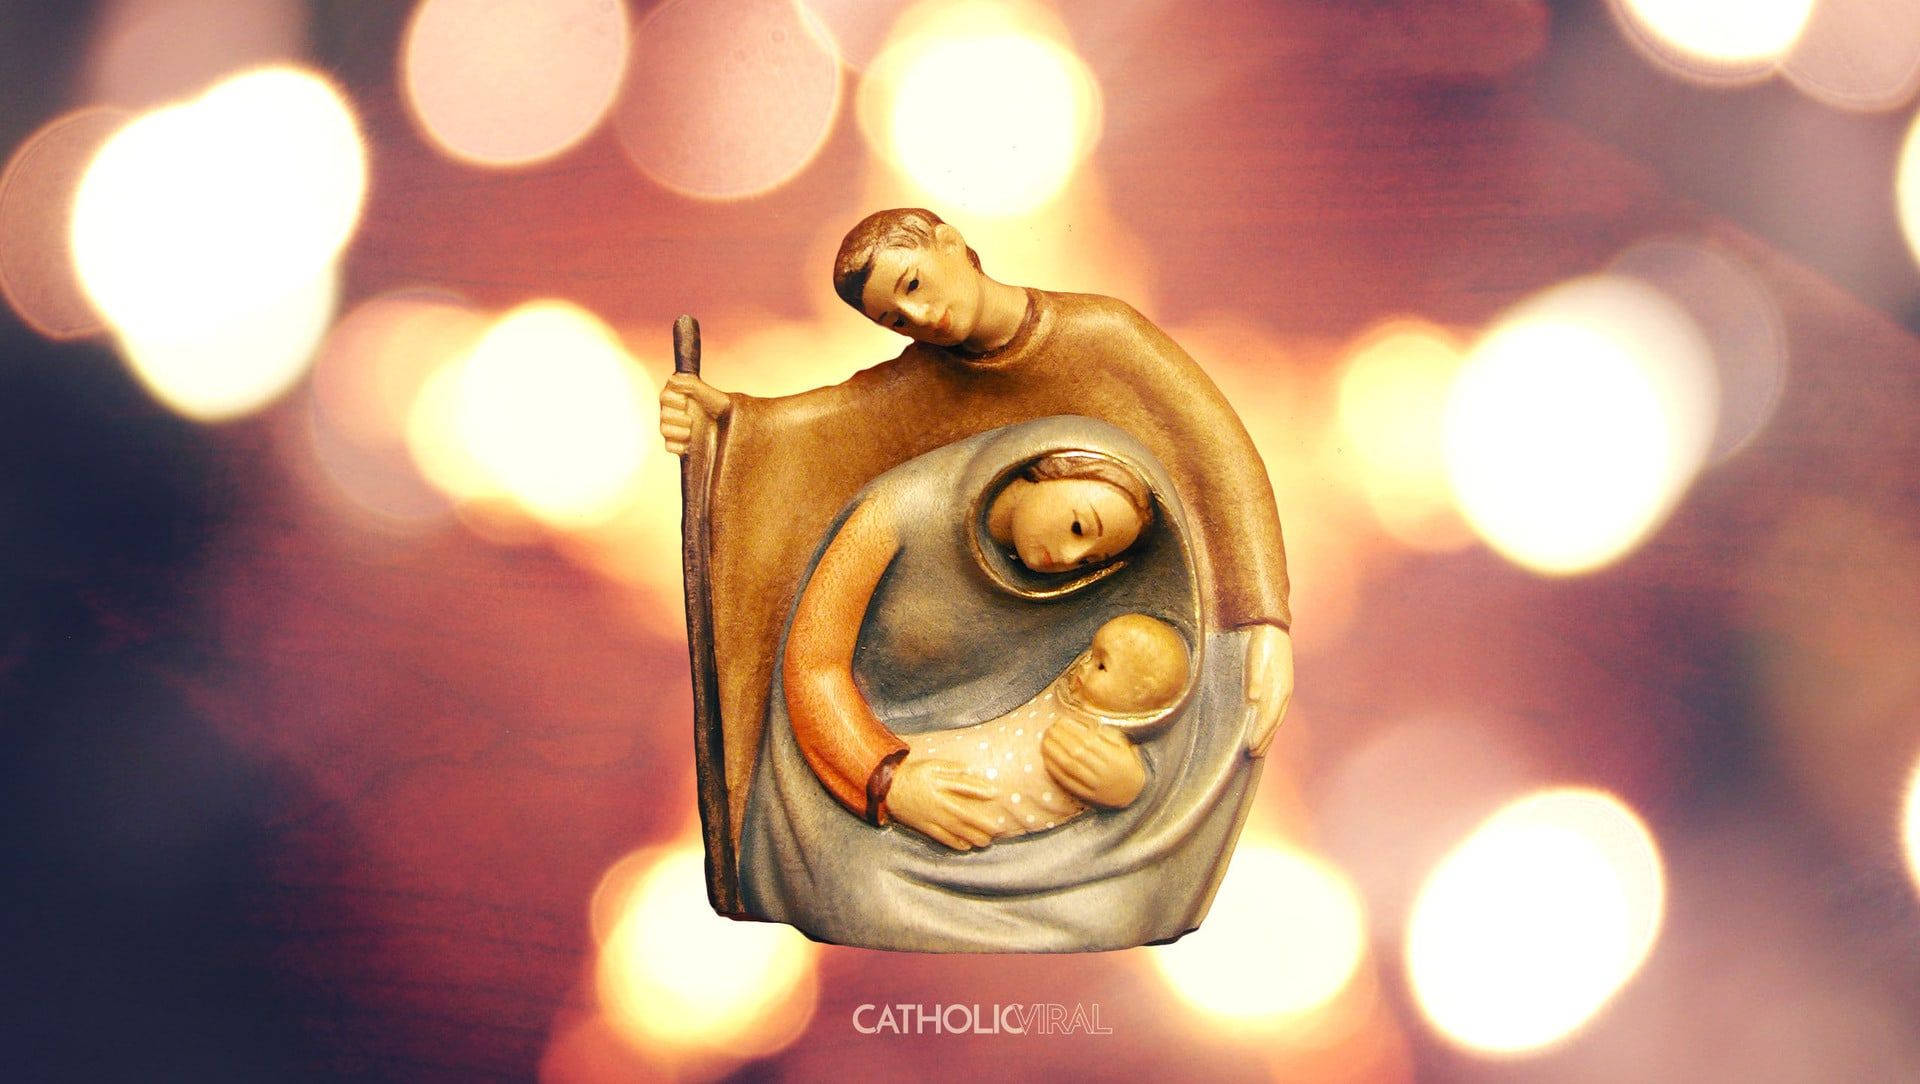 Holy Family Cute Figurine Wallpaper